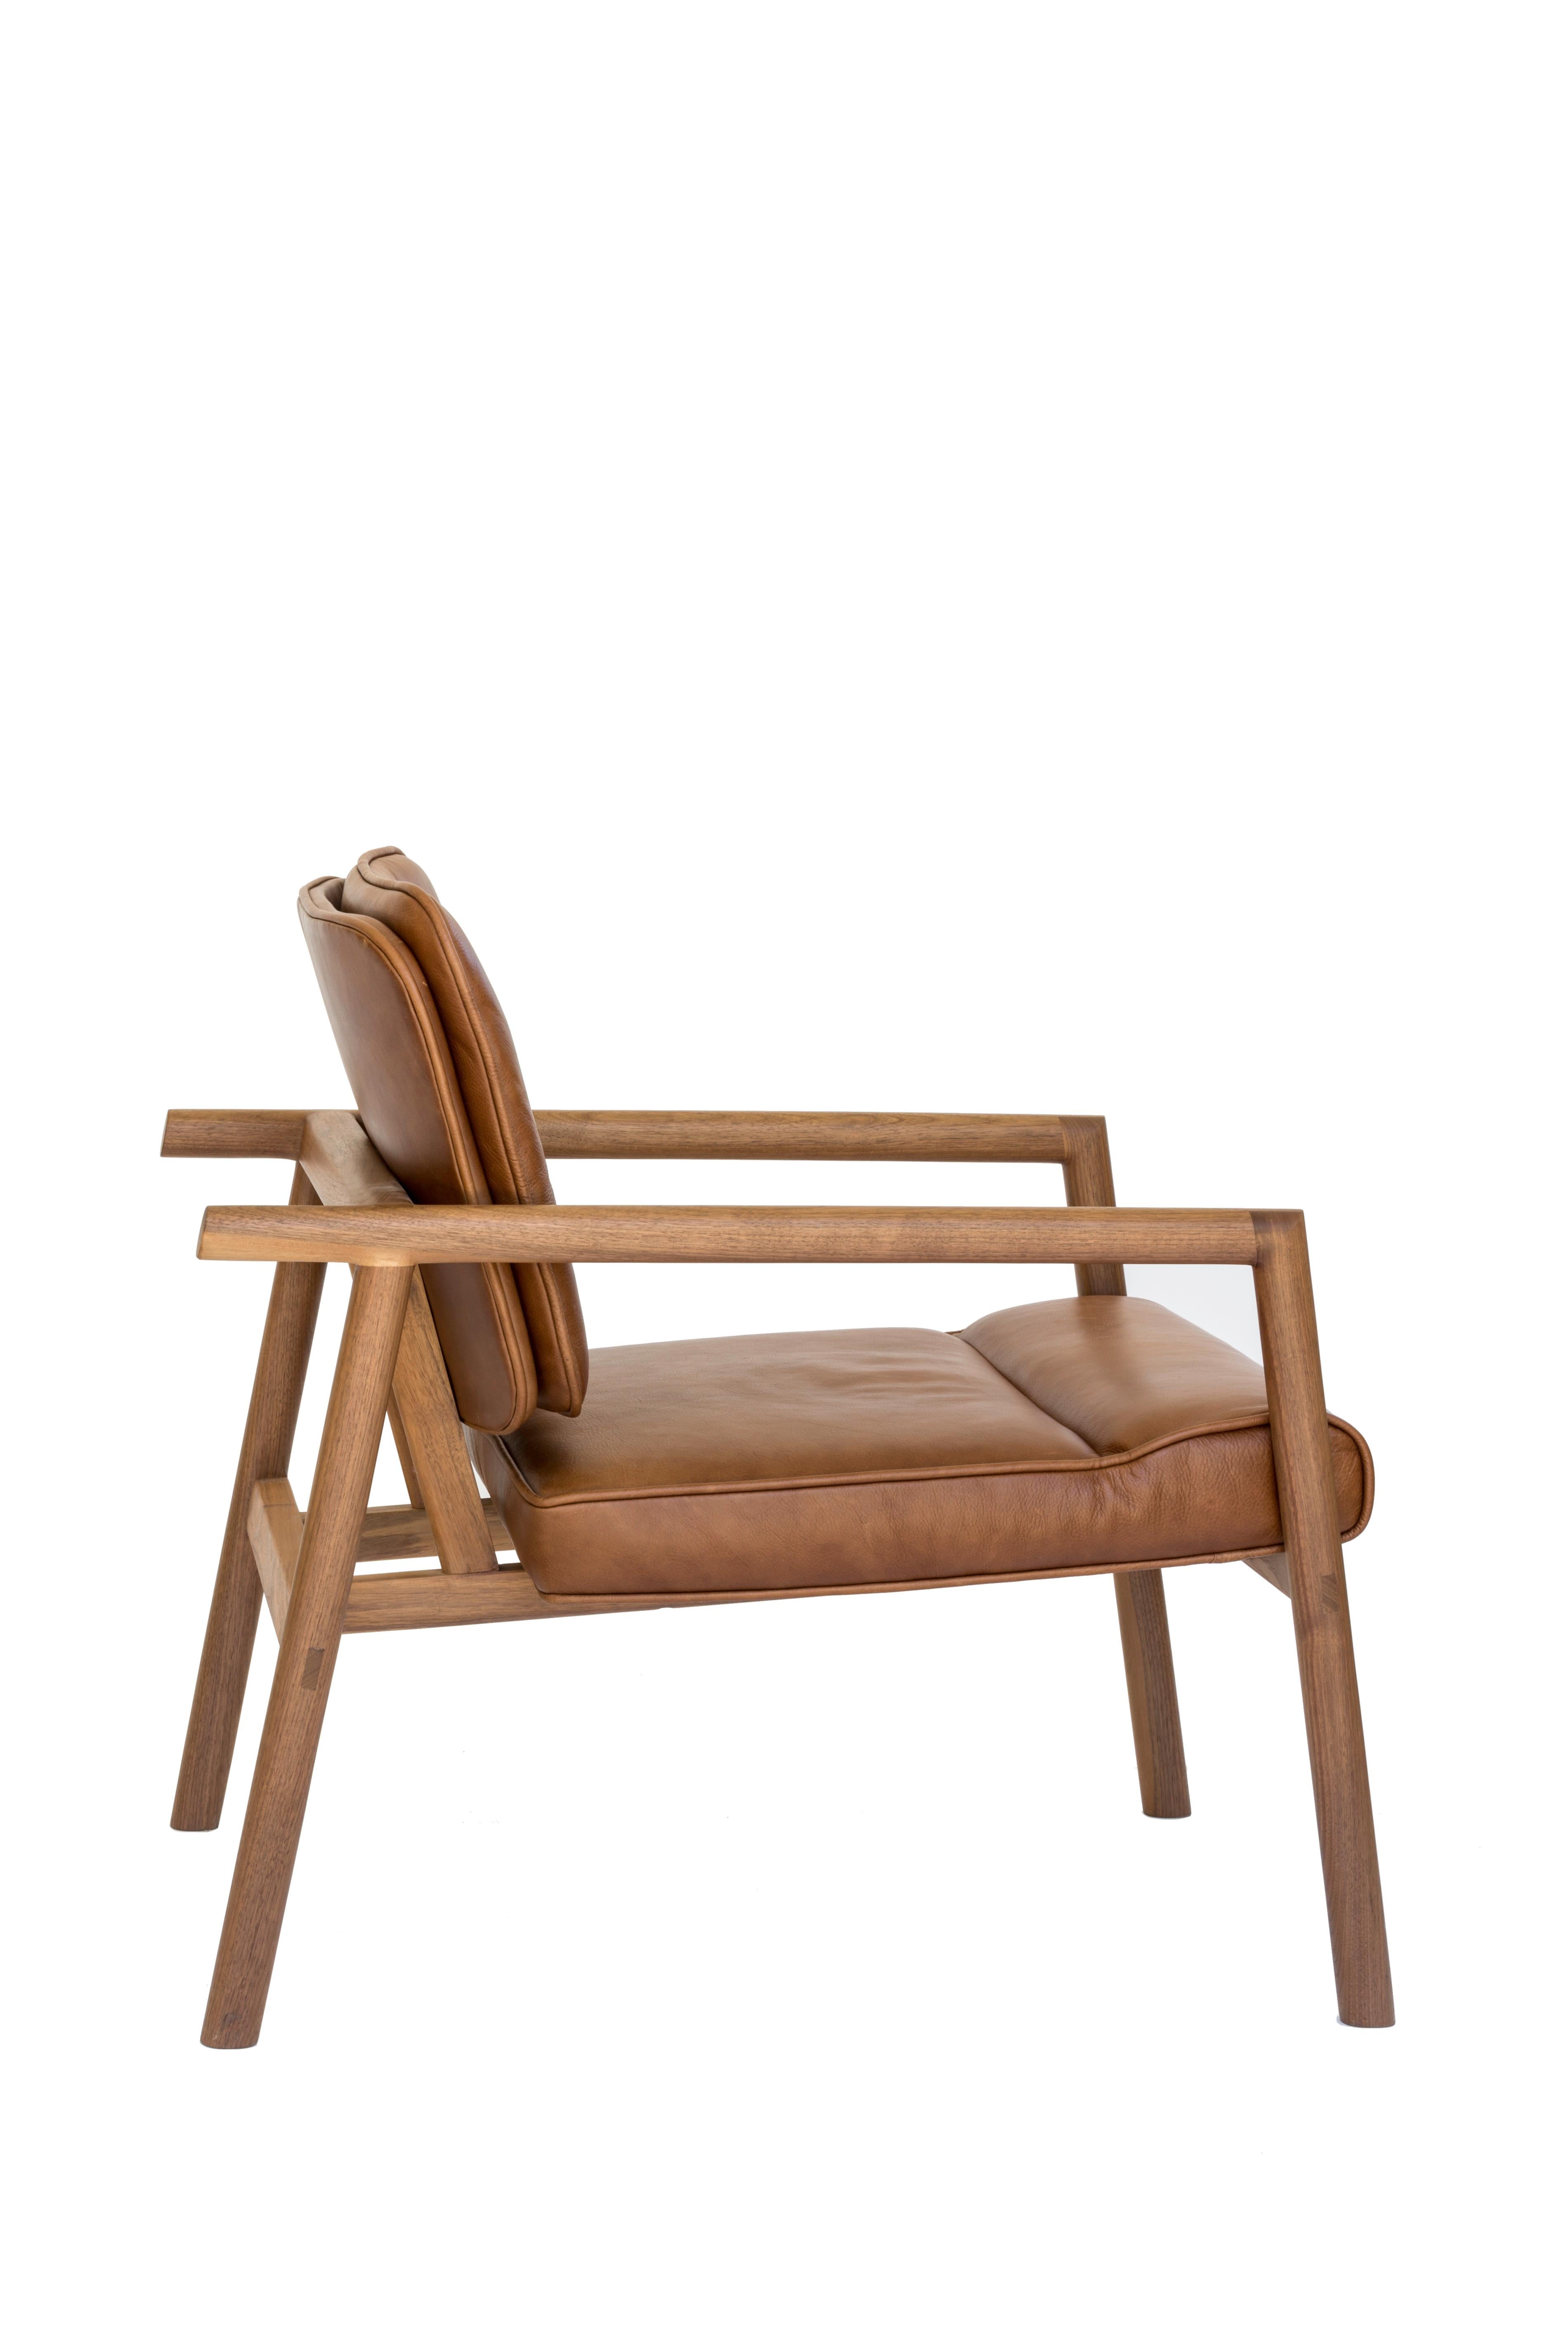 Solid wood construction with hand-cut joinery and custom upholstered seat and seat back. This chair shown in walnut and camel leather.

In stock leather choice: black, olive, camel or vegtan leather.
Wood choice: ebonized oak, walnut, natural oak or